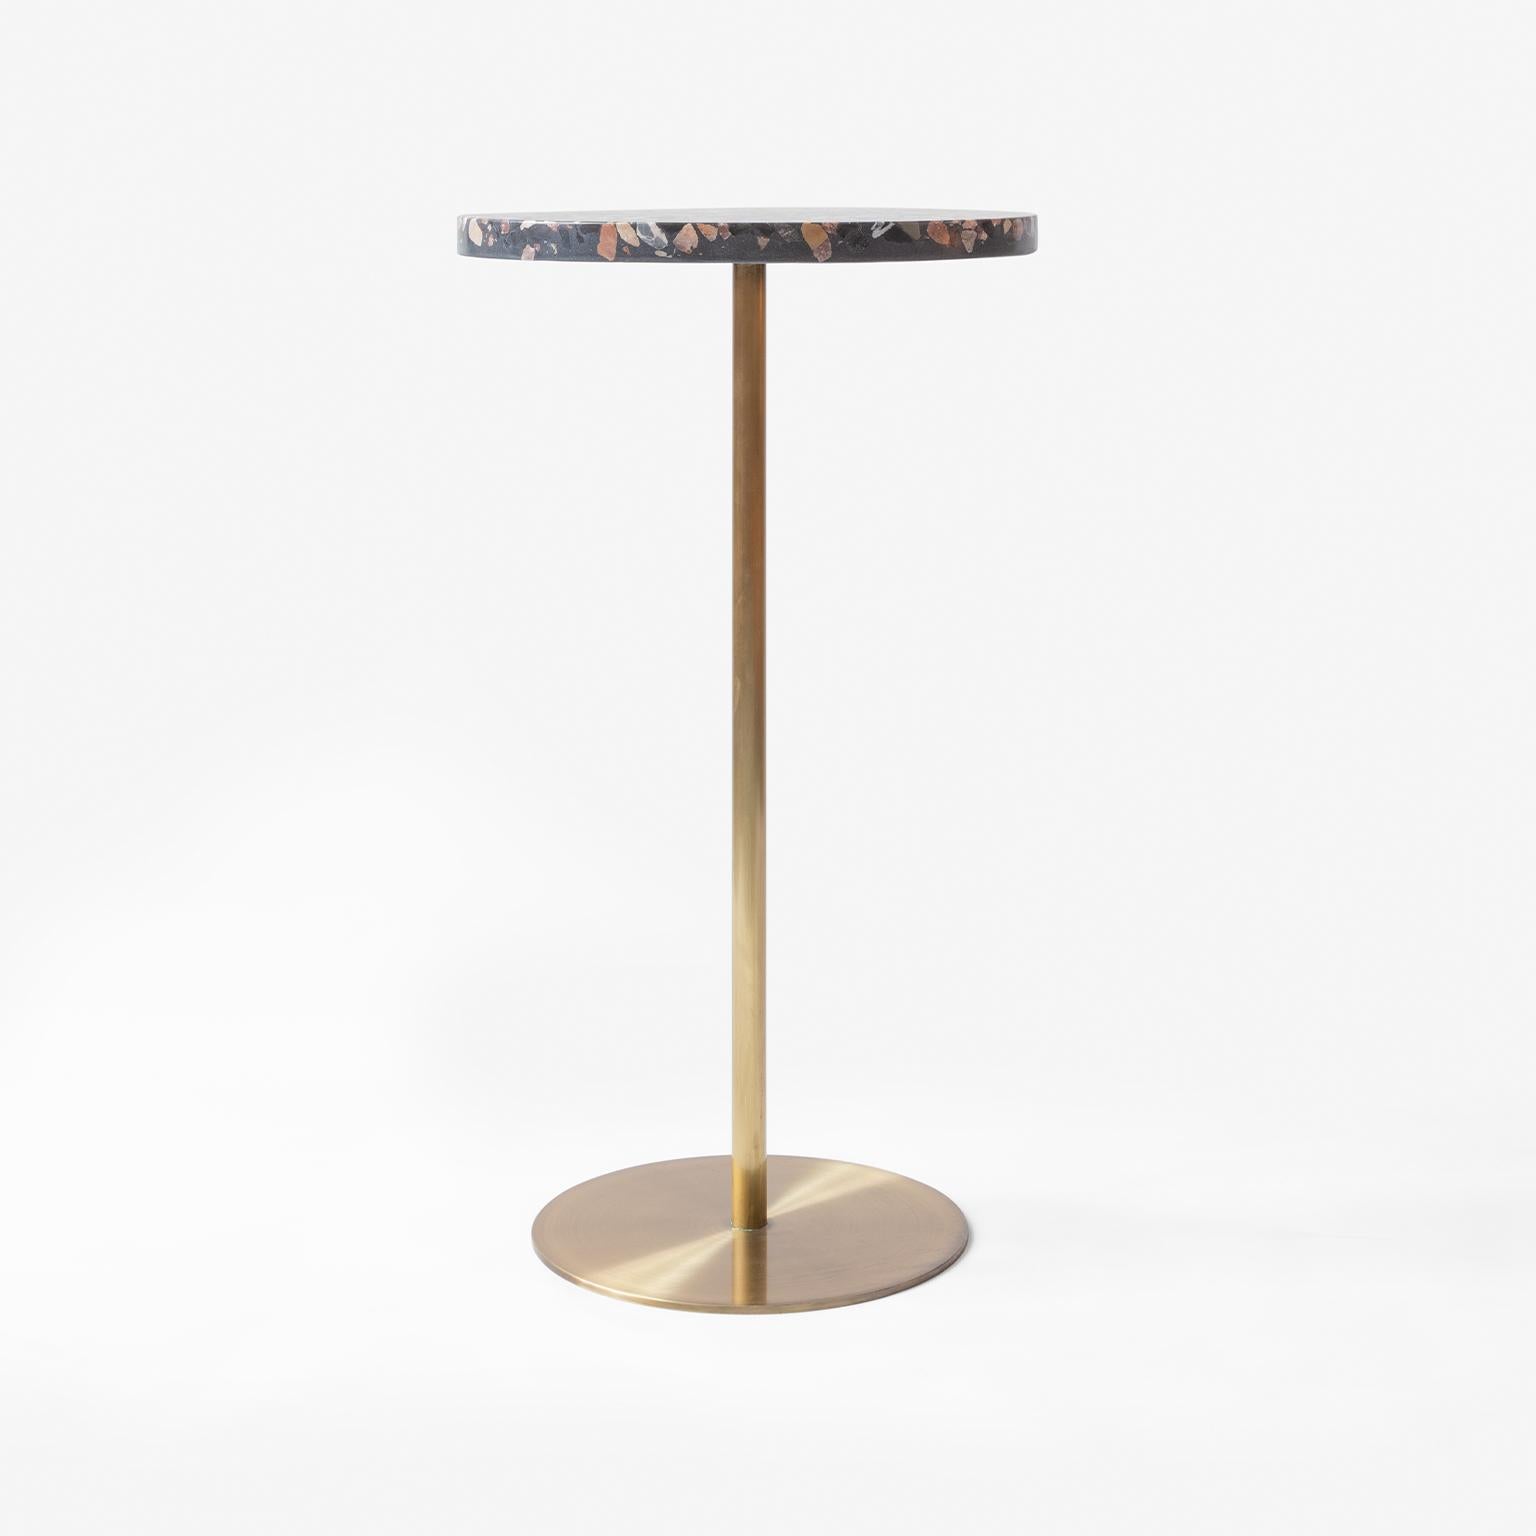 Elegant and simple basic side table with its refined marble top...

Alternatives
*Brass plated / black painted metal

*Medium: Diameter: 13.8'' / Height: 20.5''
 Large: Diameter: 13.8'' / Height: 23.6''.

MARBLE USE AND CARE
Clean surfaces with a